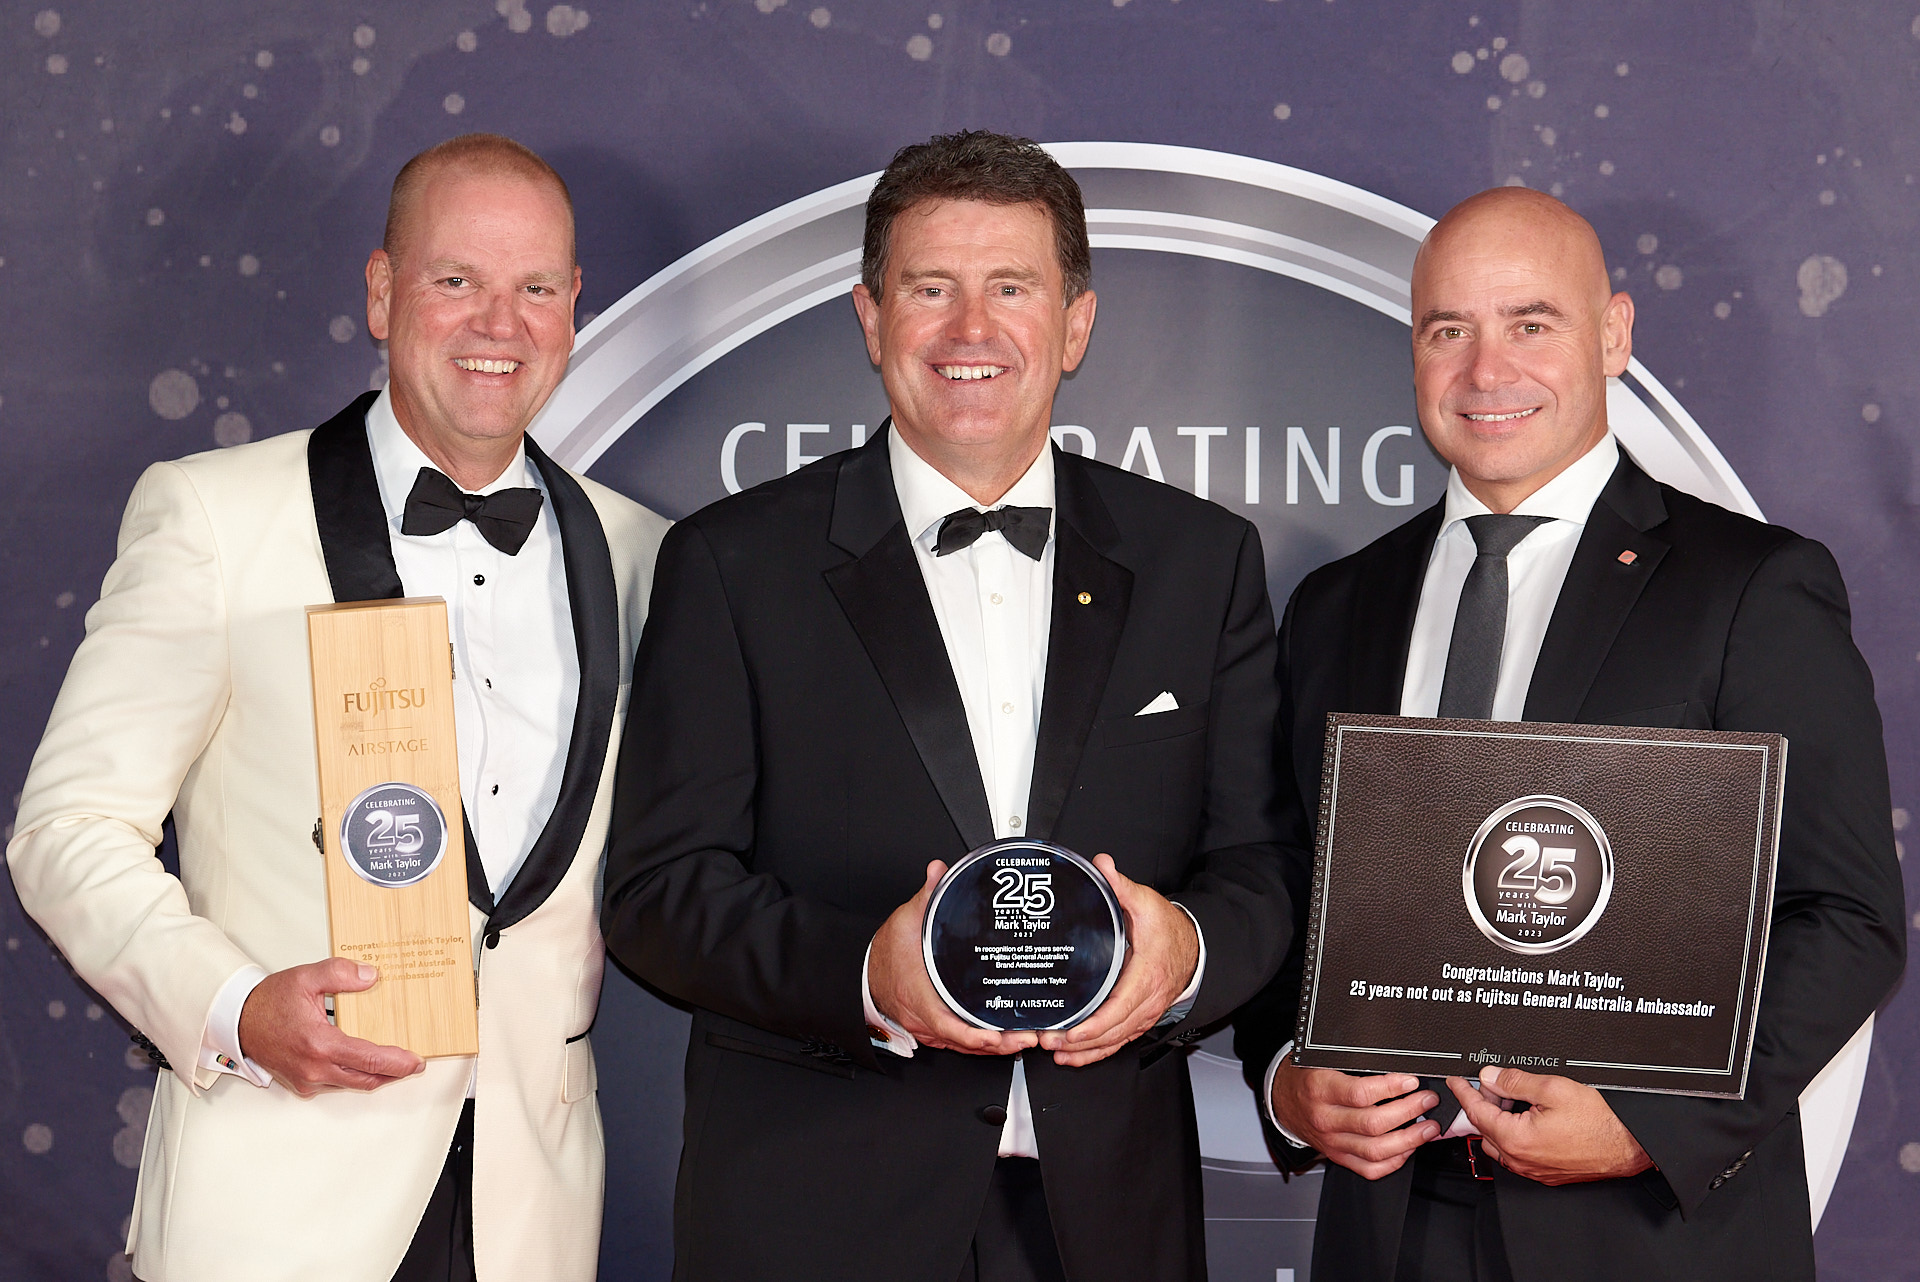 Photos by Professional Event Photographers in Sydney, Australia. 3 Dapper Gentlemen with Awards. Photo By Orlando Sydney Photography